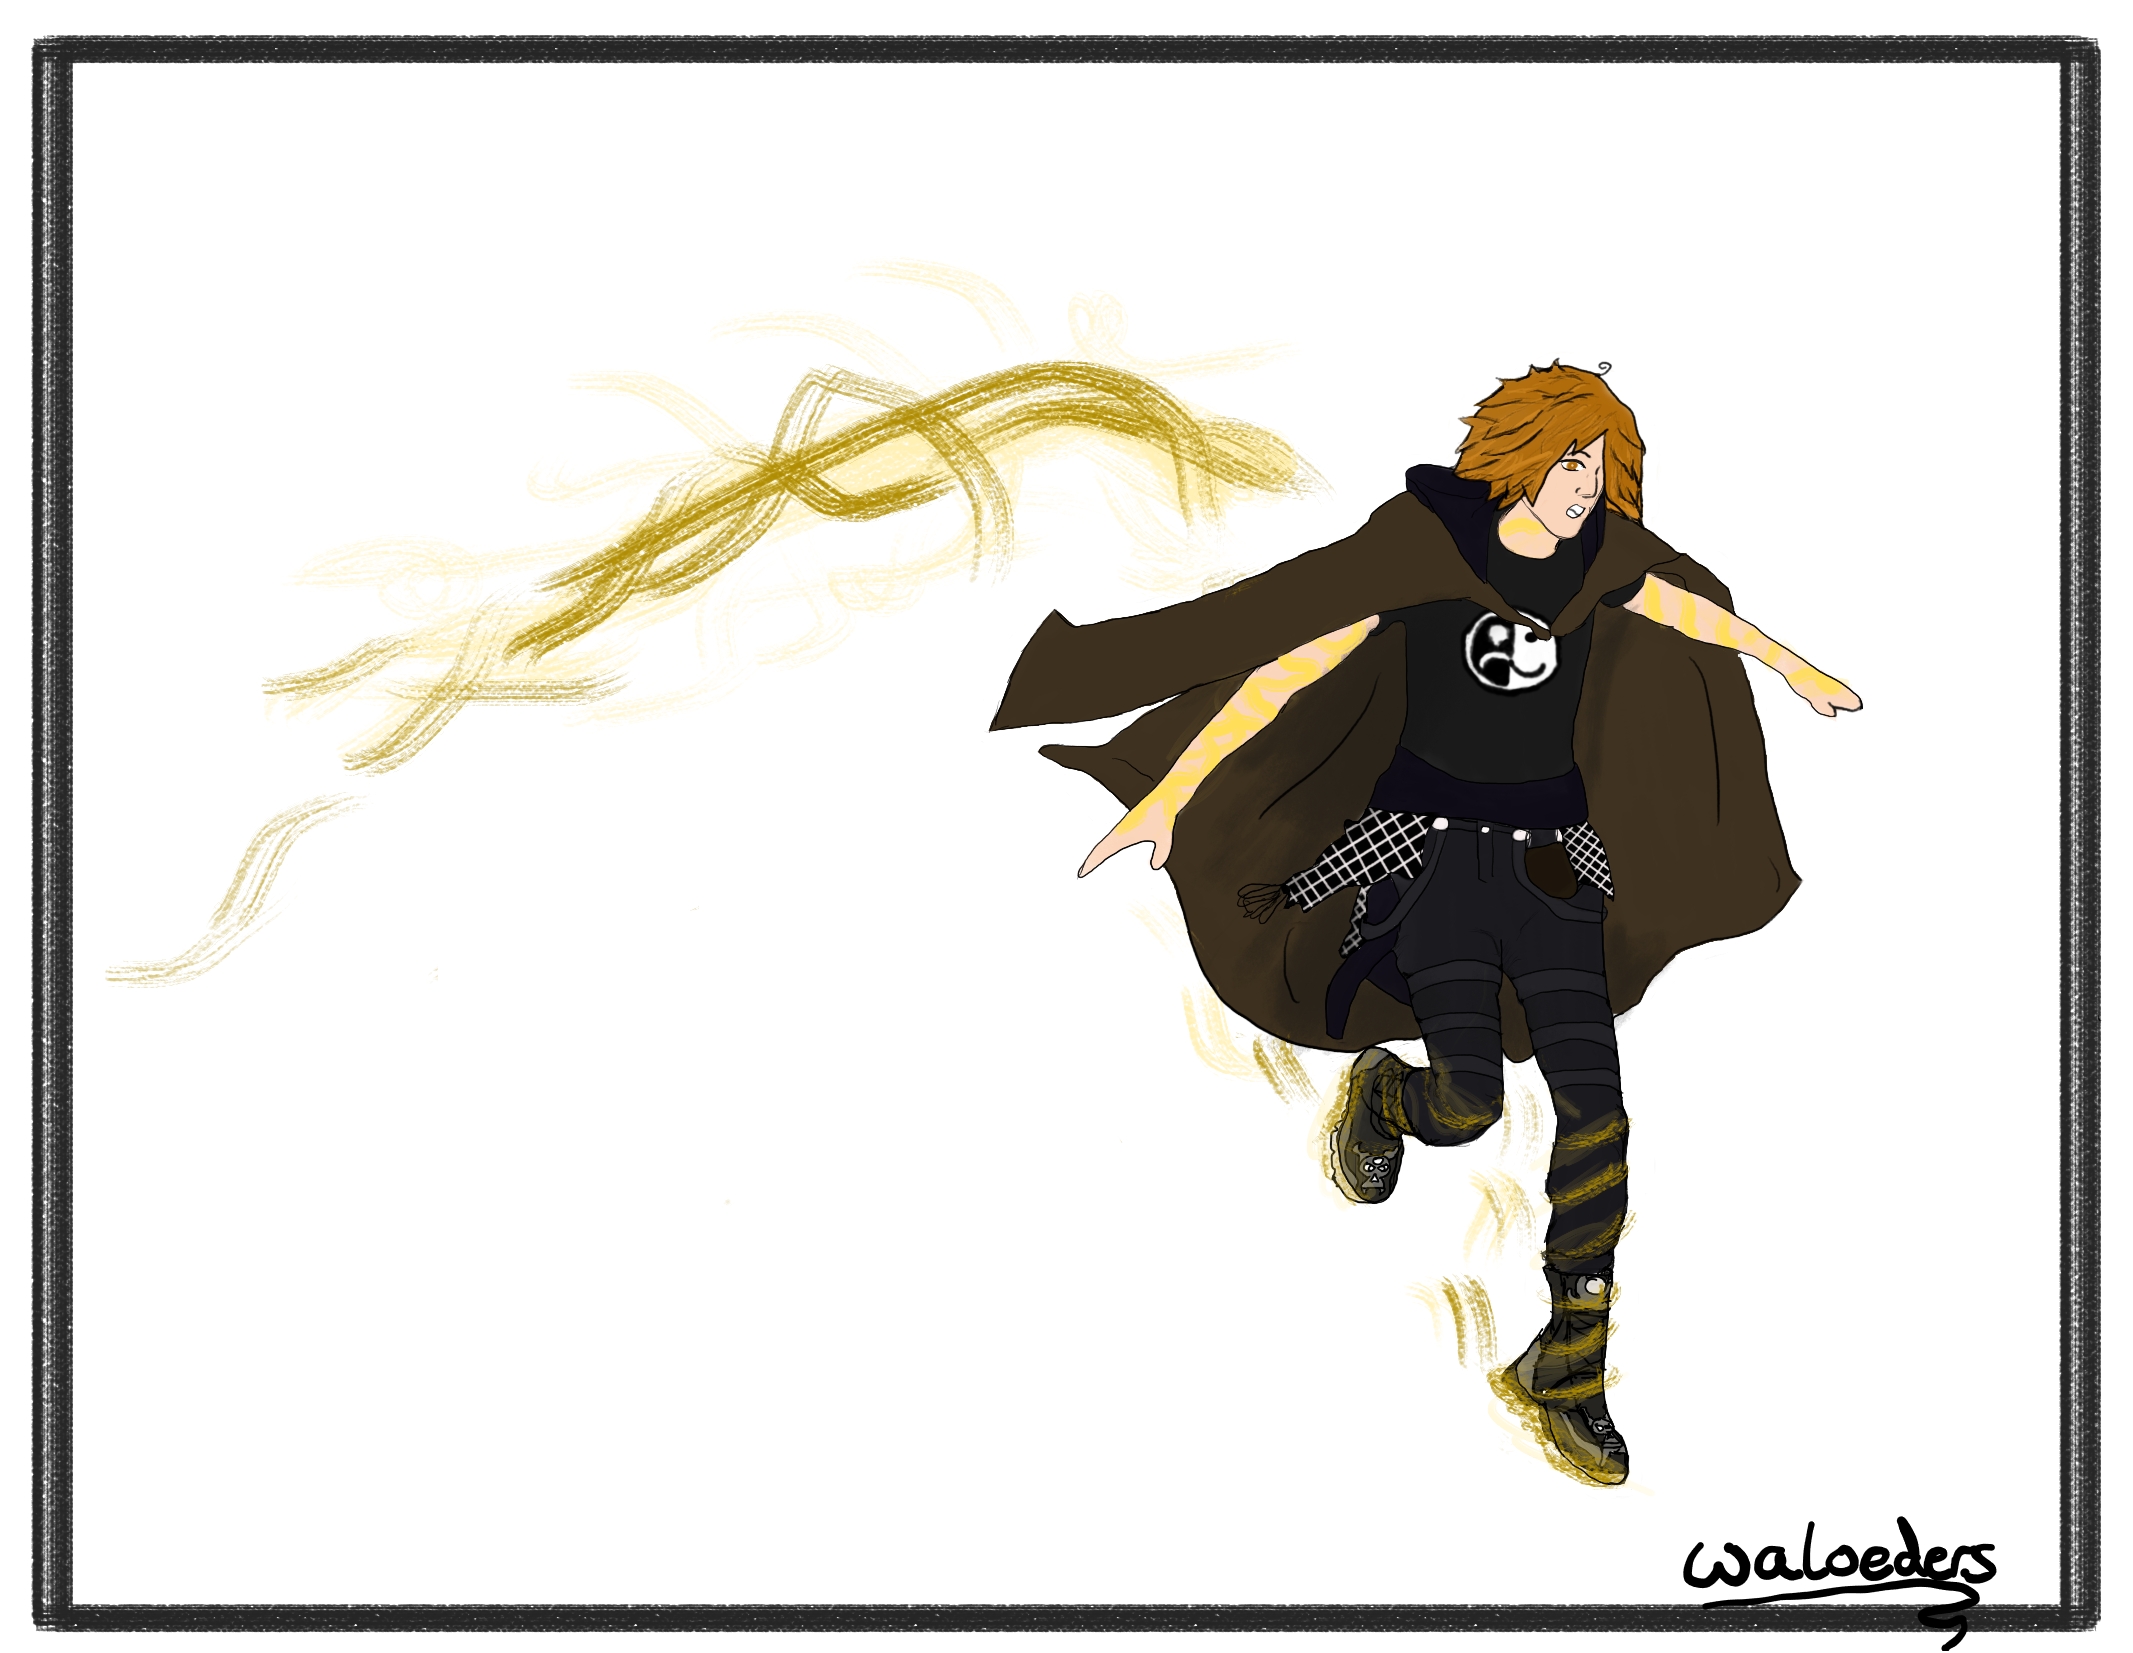 a drawing of jupe jumping in mid air in an empty background. he is a white man wearing a fall out boy 'stardust' album shirt and a cloak. he is shocked and has streaks of golden magic over his arms and trailing behind him